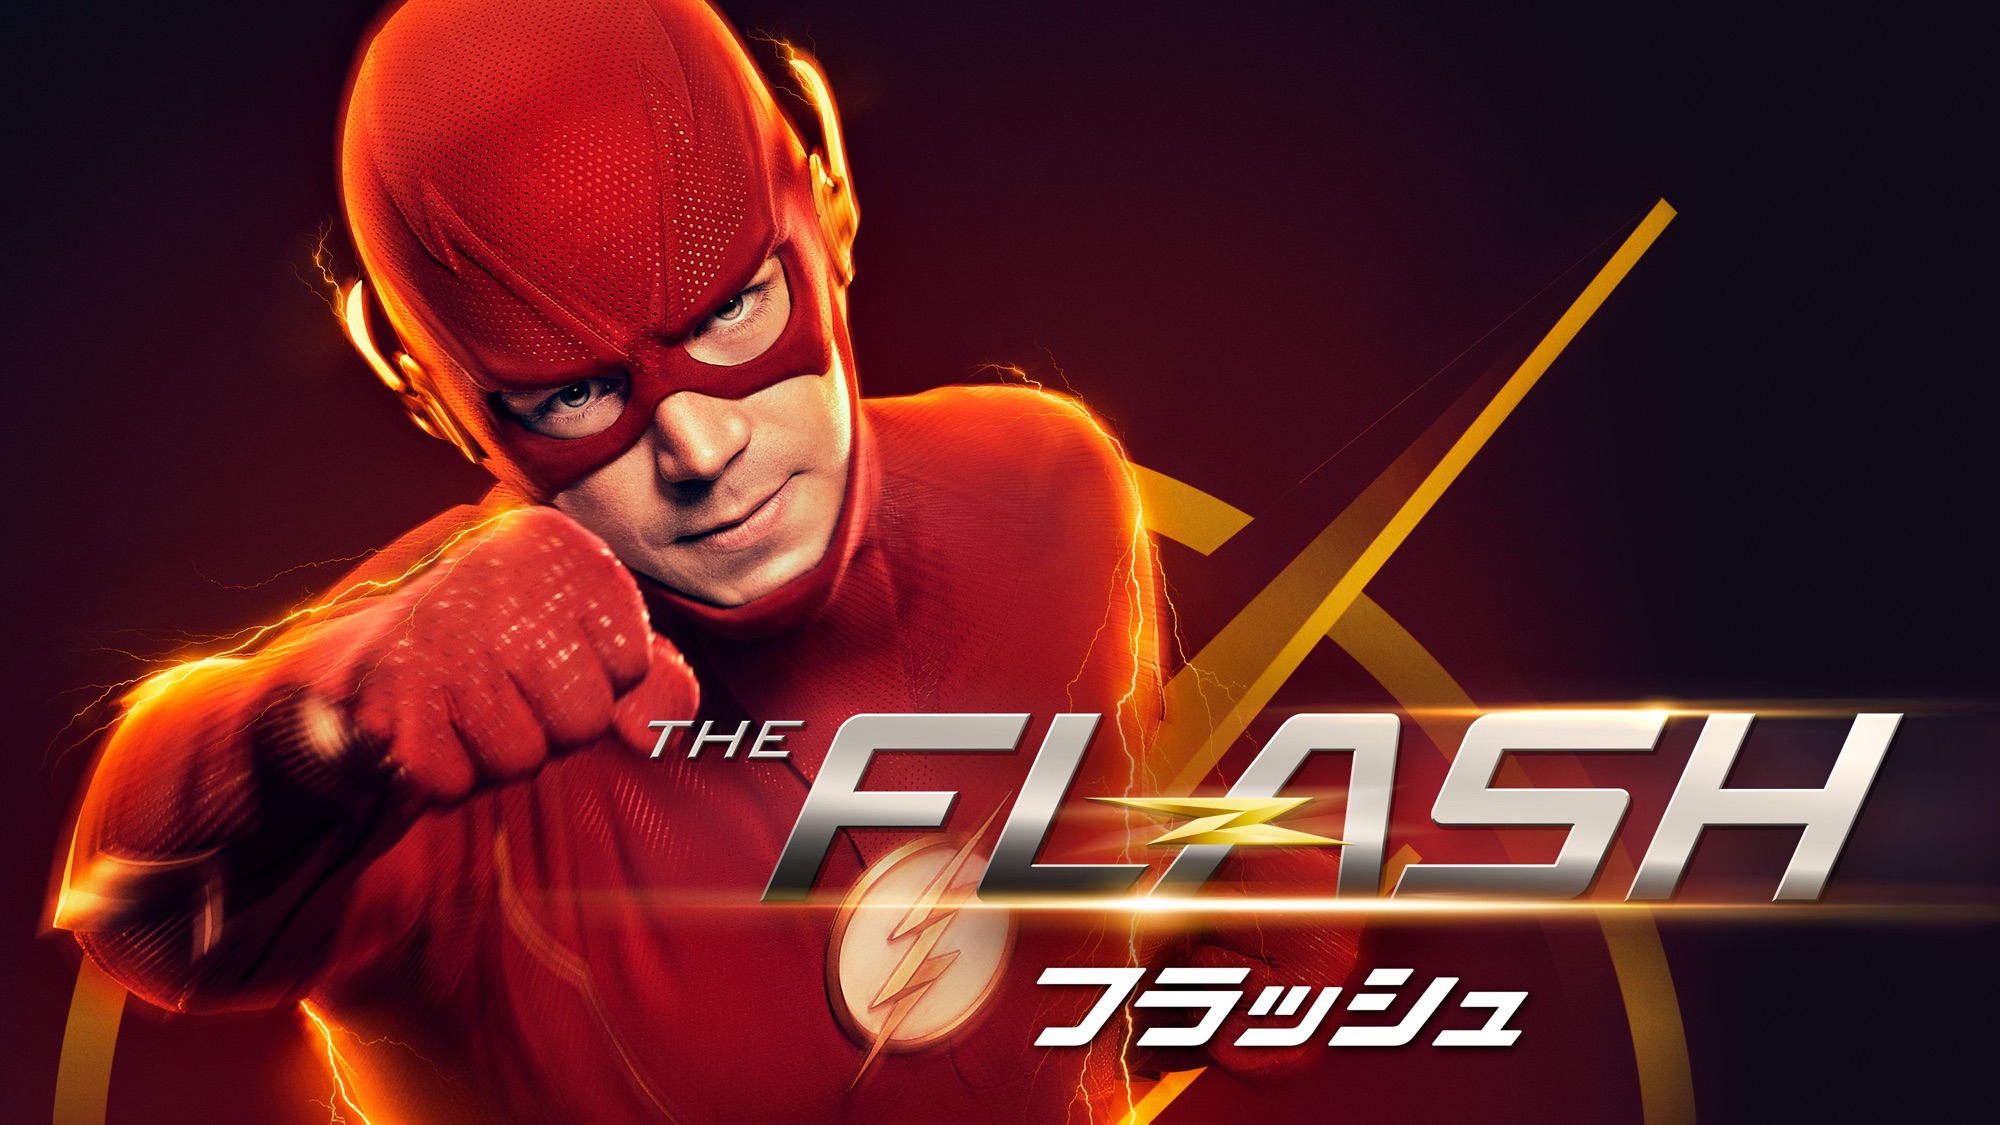 TV Show The Flash 2014 2000x1125